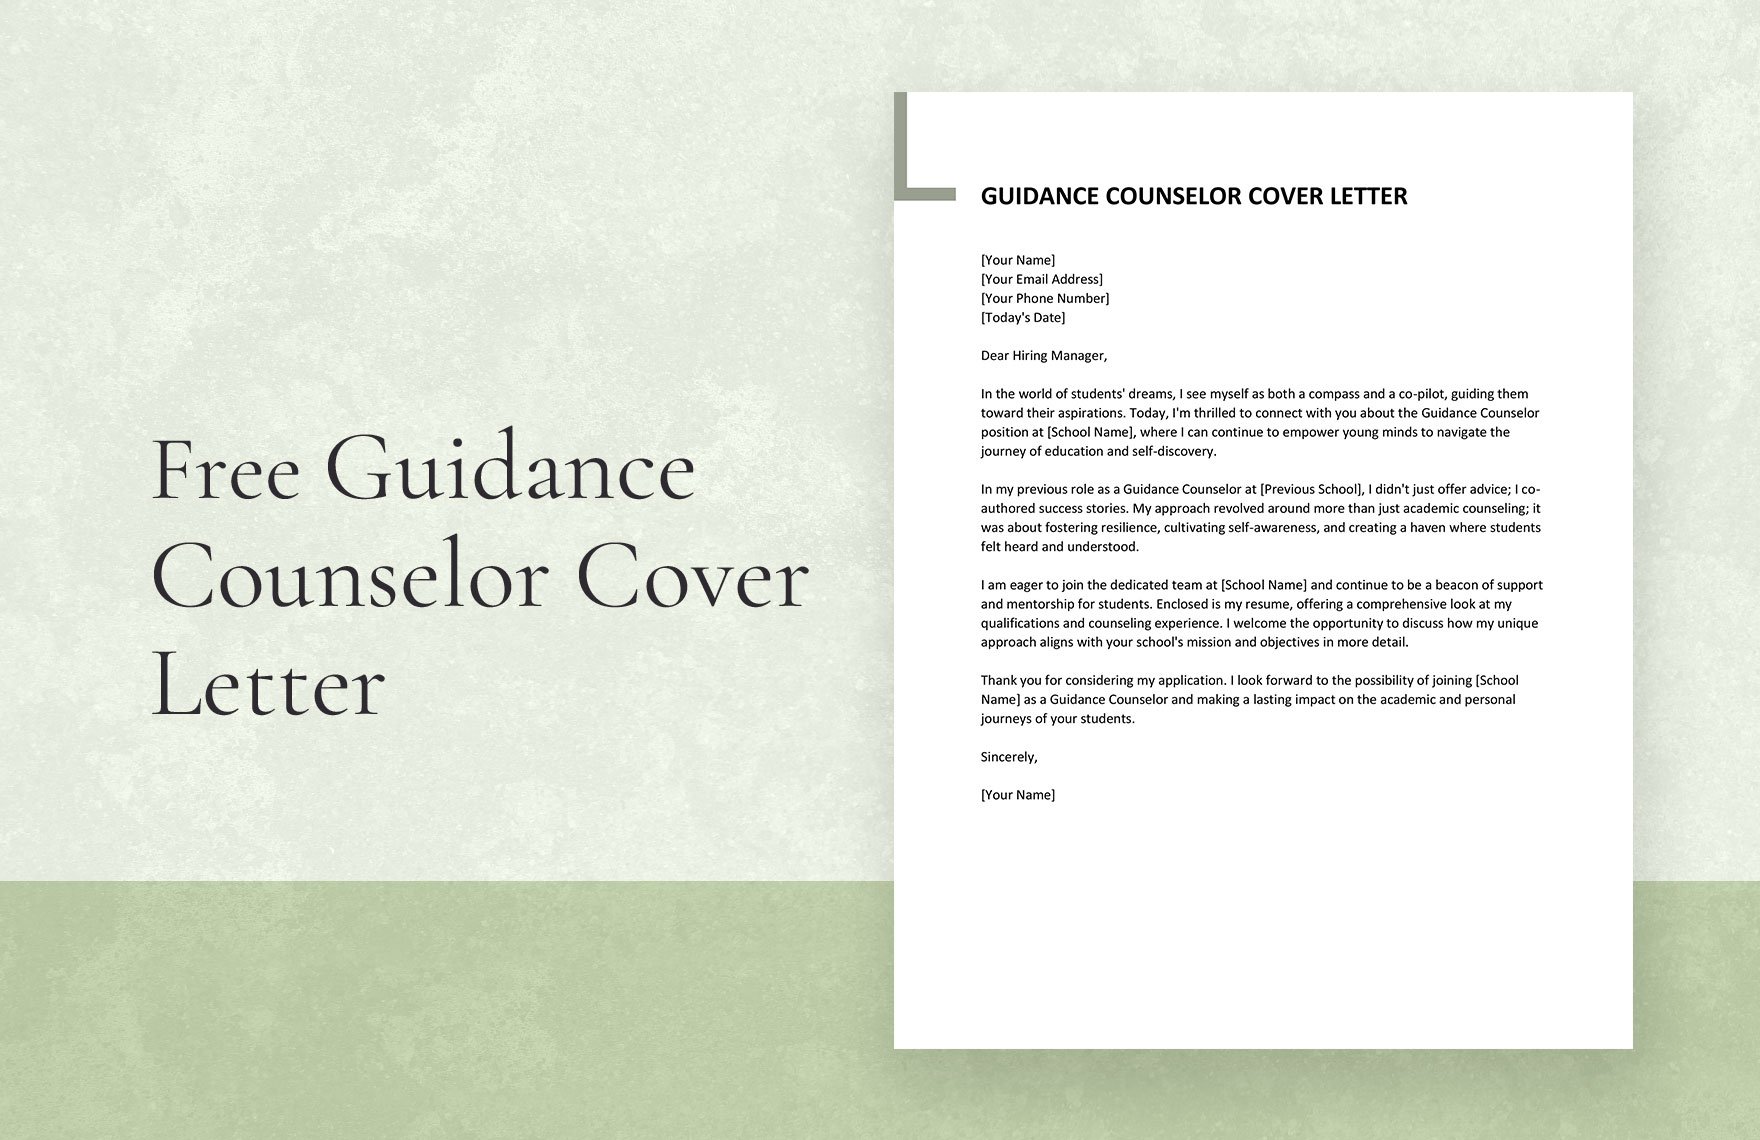 Guidance Counselor Cover Letter in Word, Google Docs